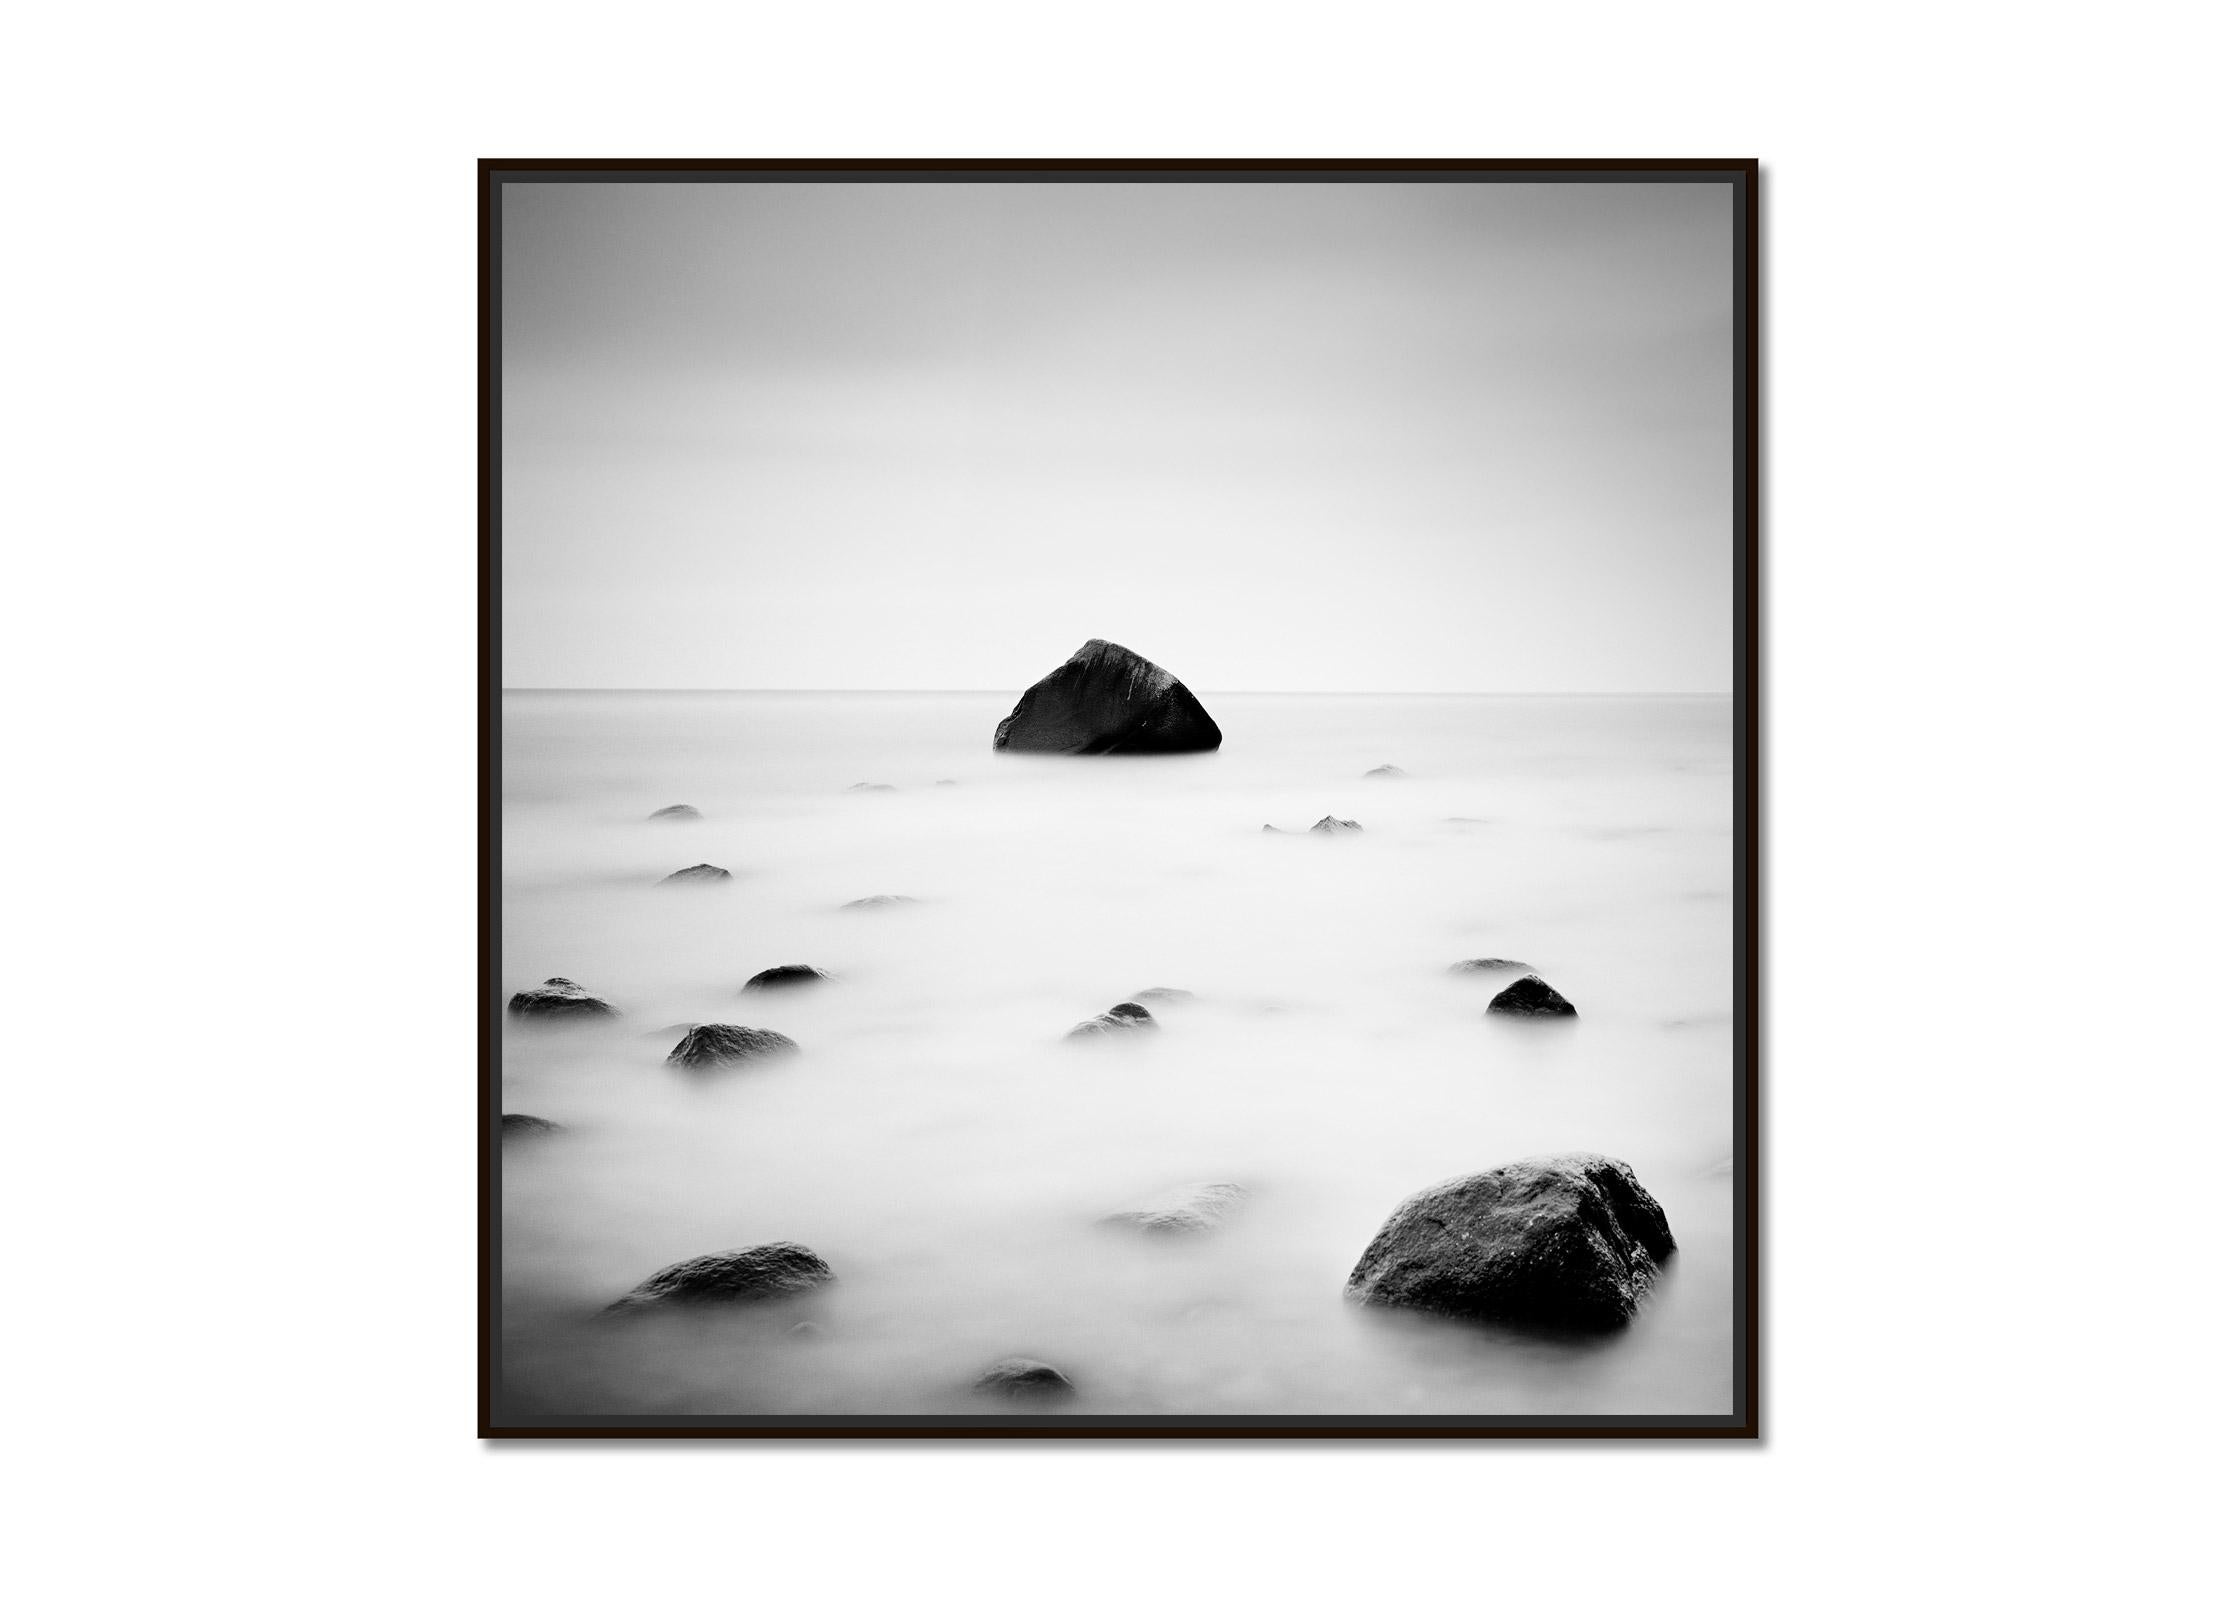 Glacial Erratic, Great Rocks, Germany, black and white, long exposure landscape  - Photograph by Gerald Berghammer